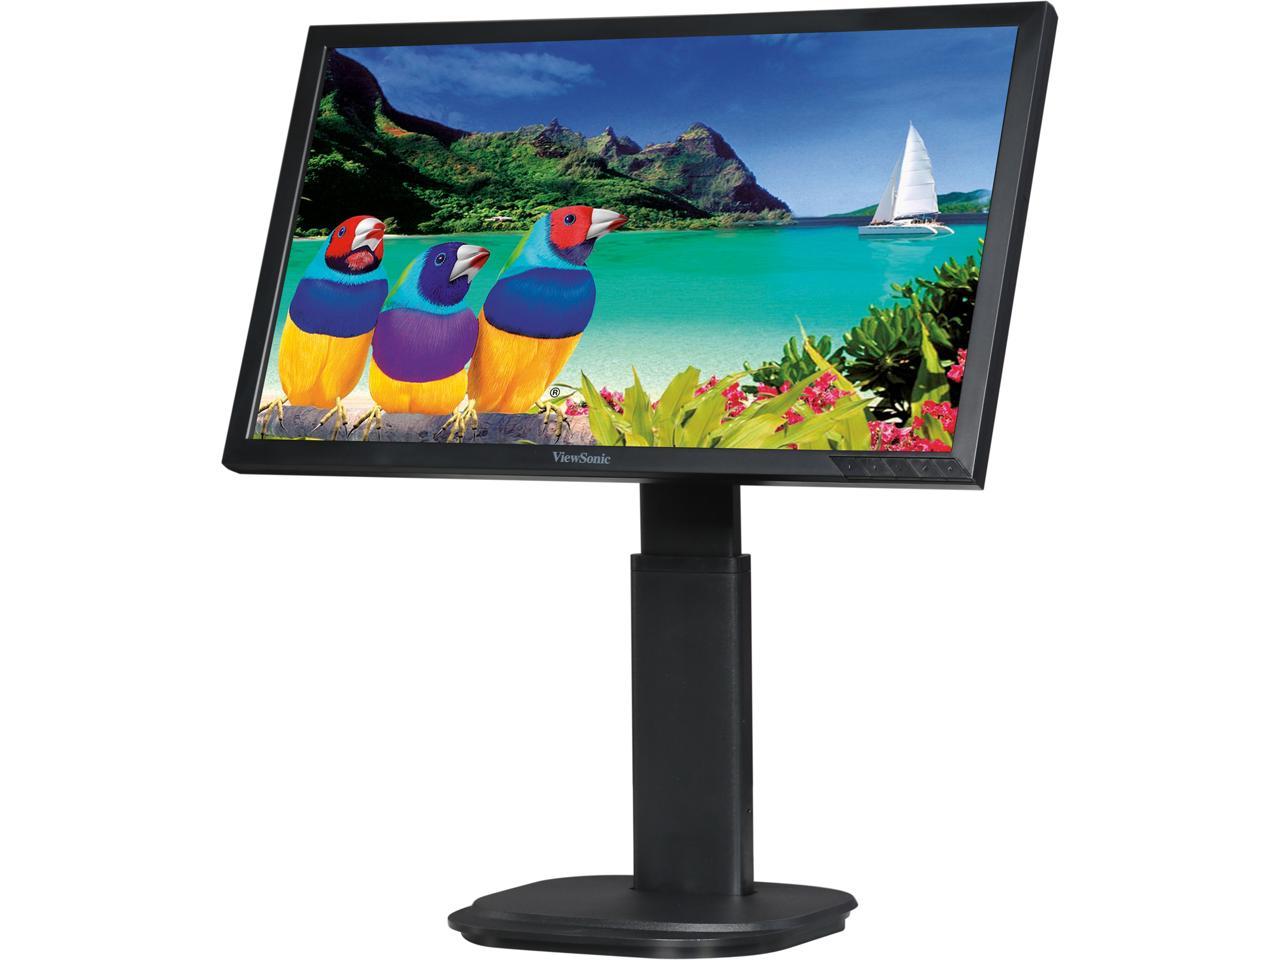 ViewSonic VG2239SMH 22" (Actual size 21.5") 1920 x 1080 6.50 ms 60 Hz D-Sub, HDMI, DisplayPort Built-in Speakers Monitor Tile, Height, Swivel and Pivot Adjustable, VESA Mountable